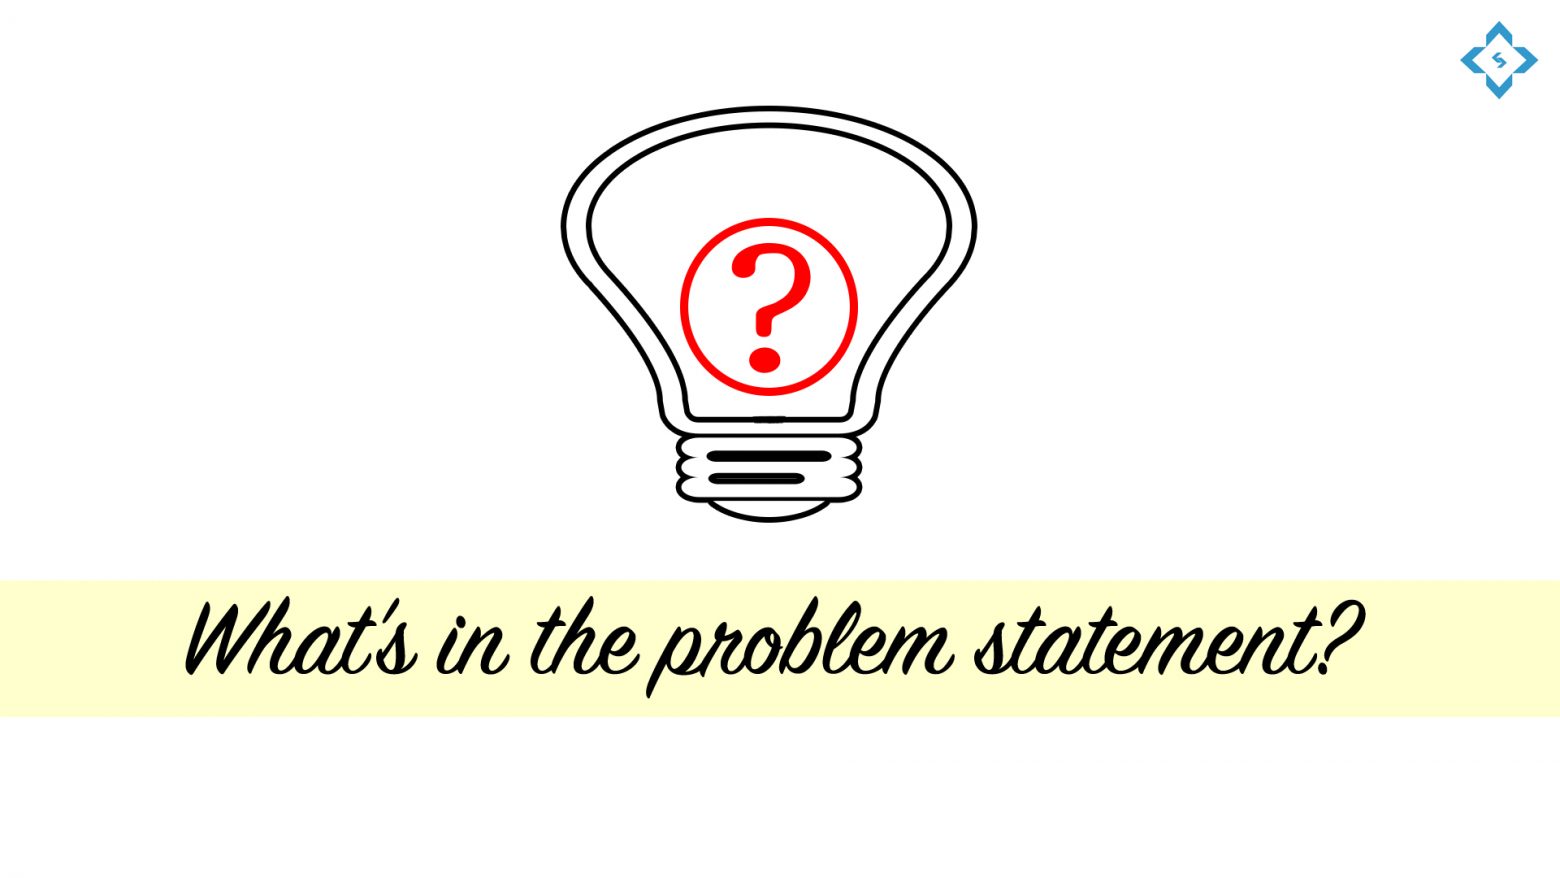 What’s in the problem statement?